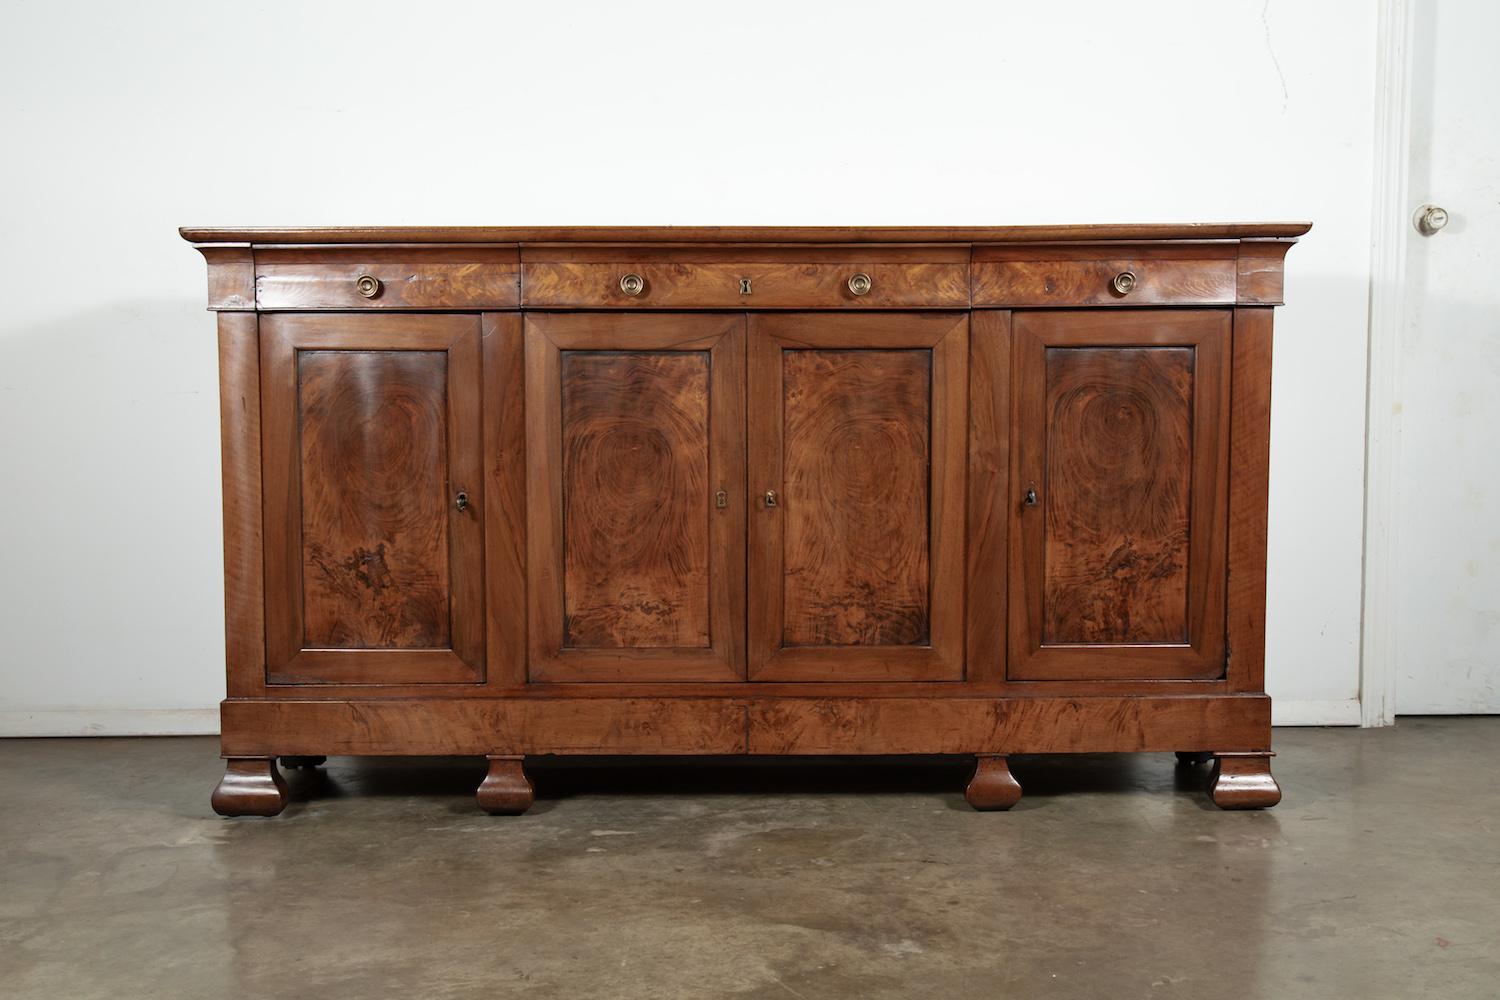 A very handsome mid-19th century French period Louis Philippe enfilade buffet handcrafted of solid chestnut and burled chestnut by skilled artisans near Normandy, having four burled drawers over four doors with burled panels. Burled apron resting on